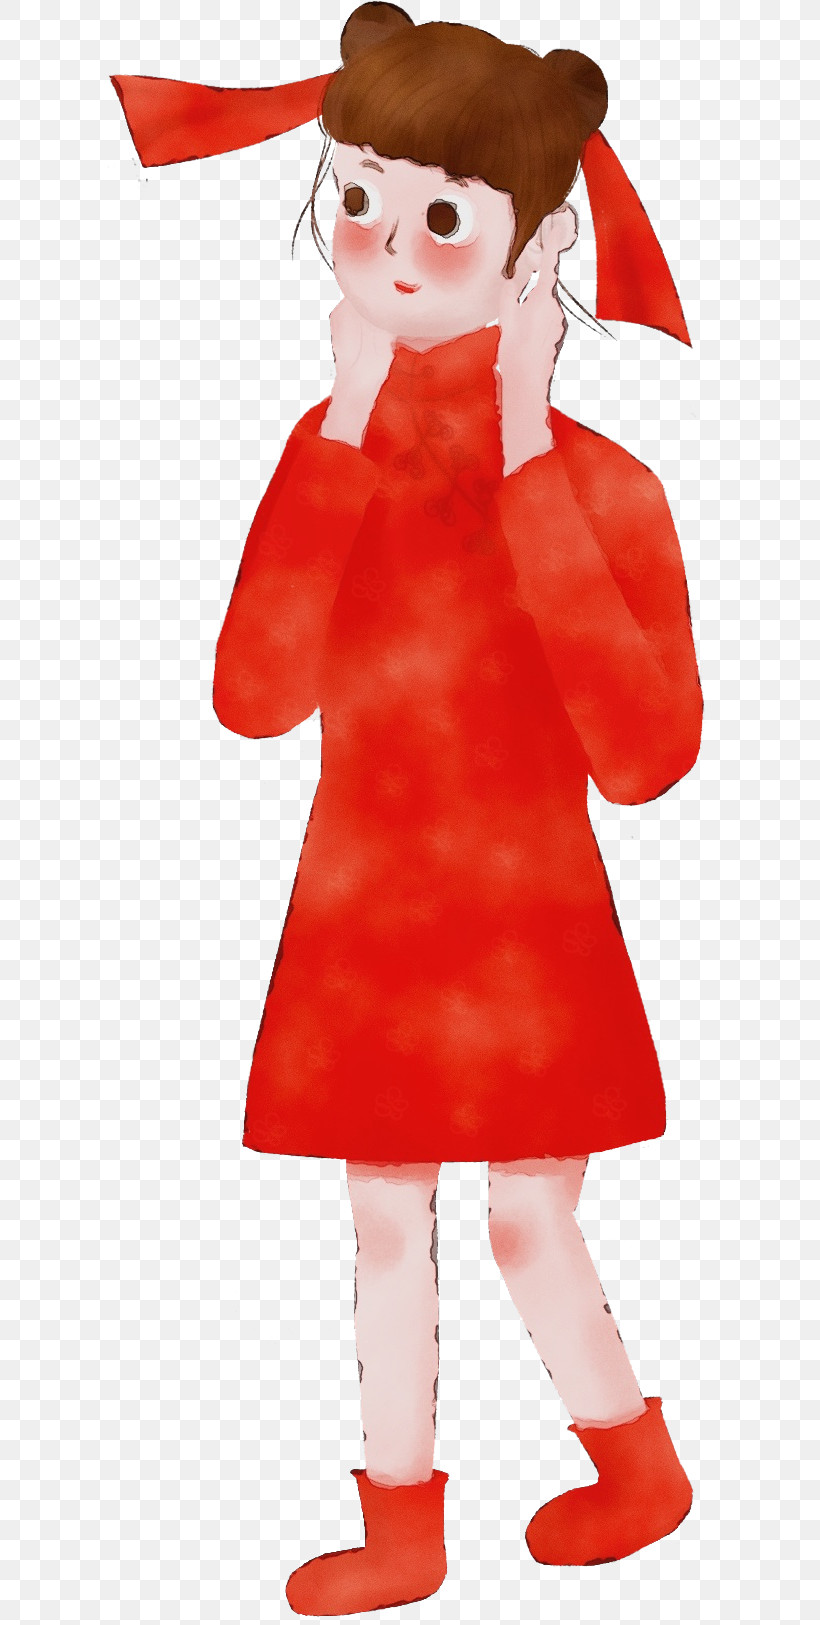 Clothing Red Costume Outerwear Dress, PNG, 603x1625px, Watercolor, Clothing, Costume, Dress, Outerwear Download Free